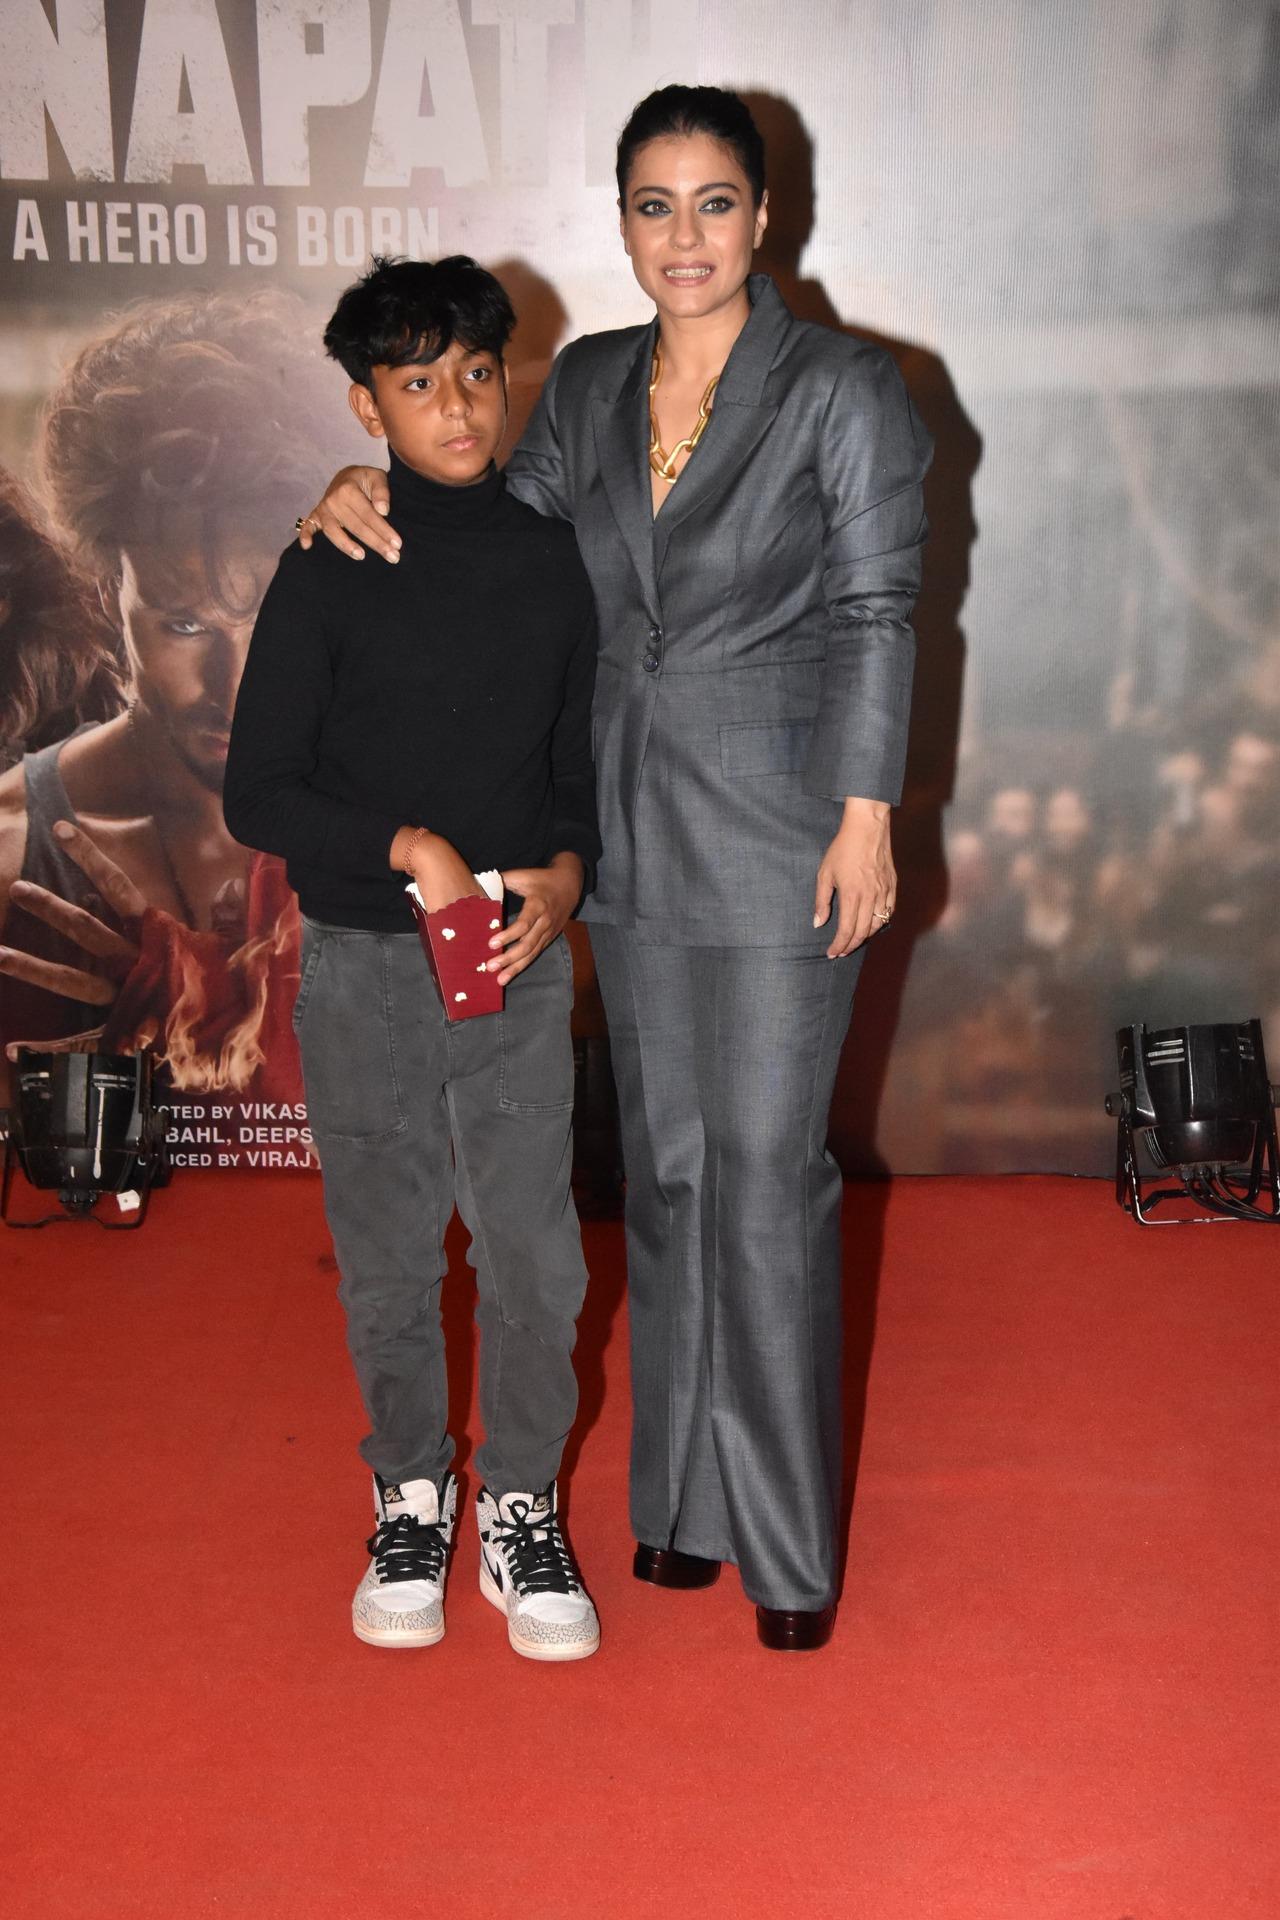 Kajol was accompanied by her younger son Yug. While Yug munched on popcorn at the red carpet, mother Kajol posed with him dressed in a grey pantsuit